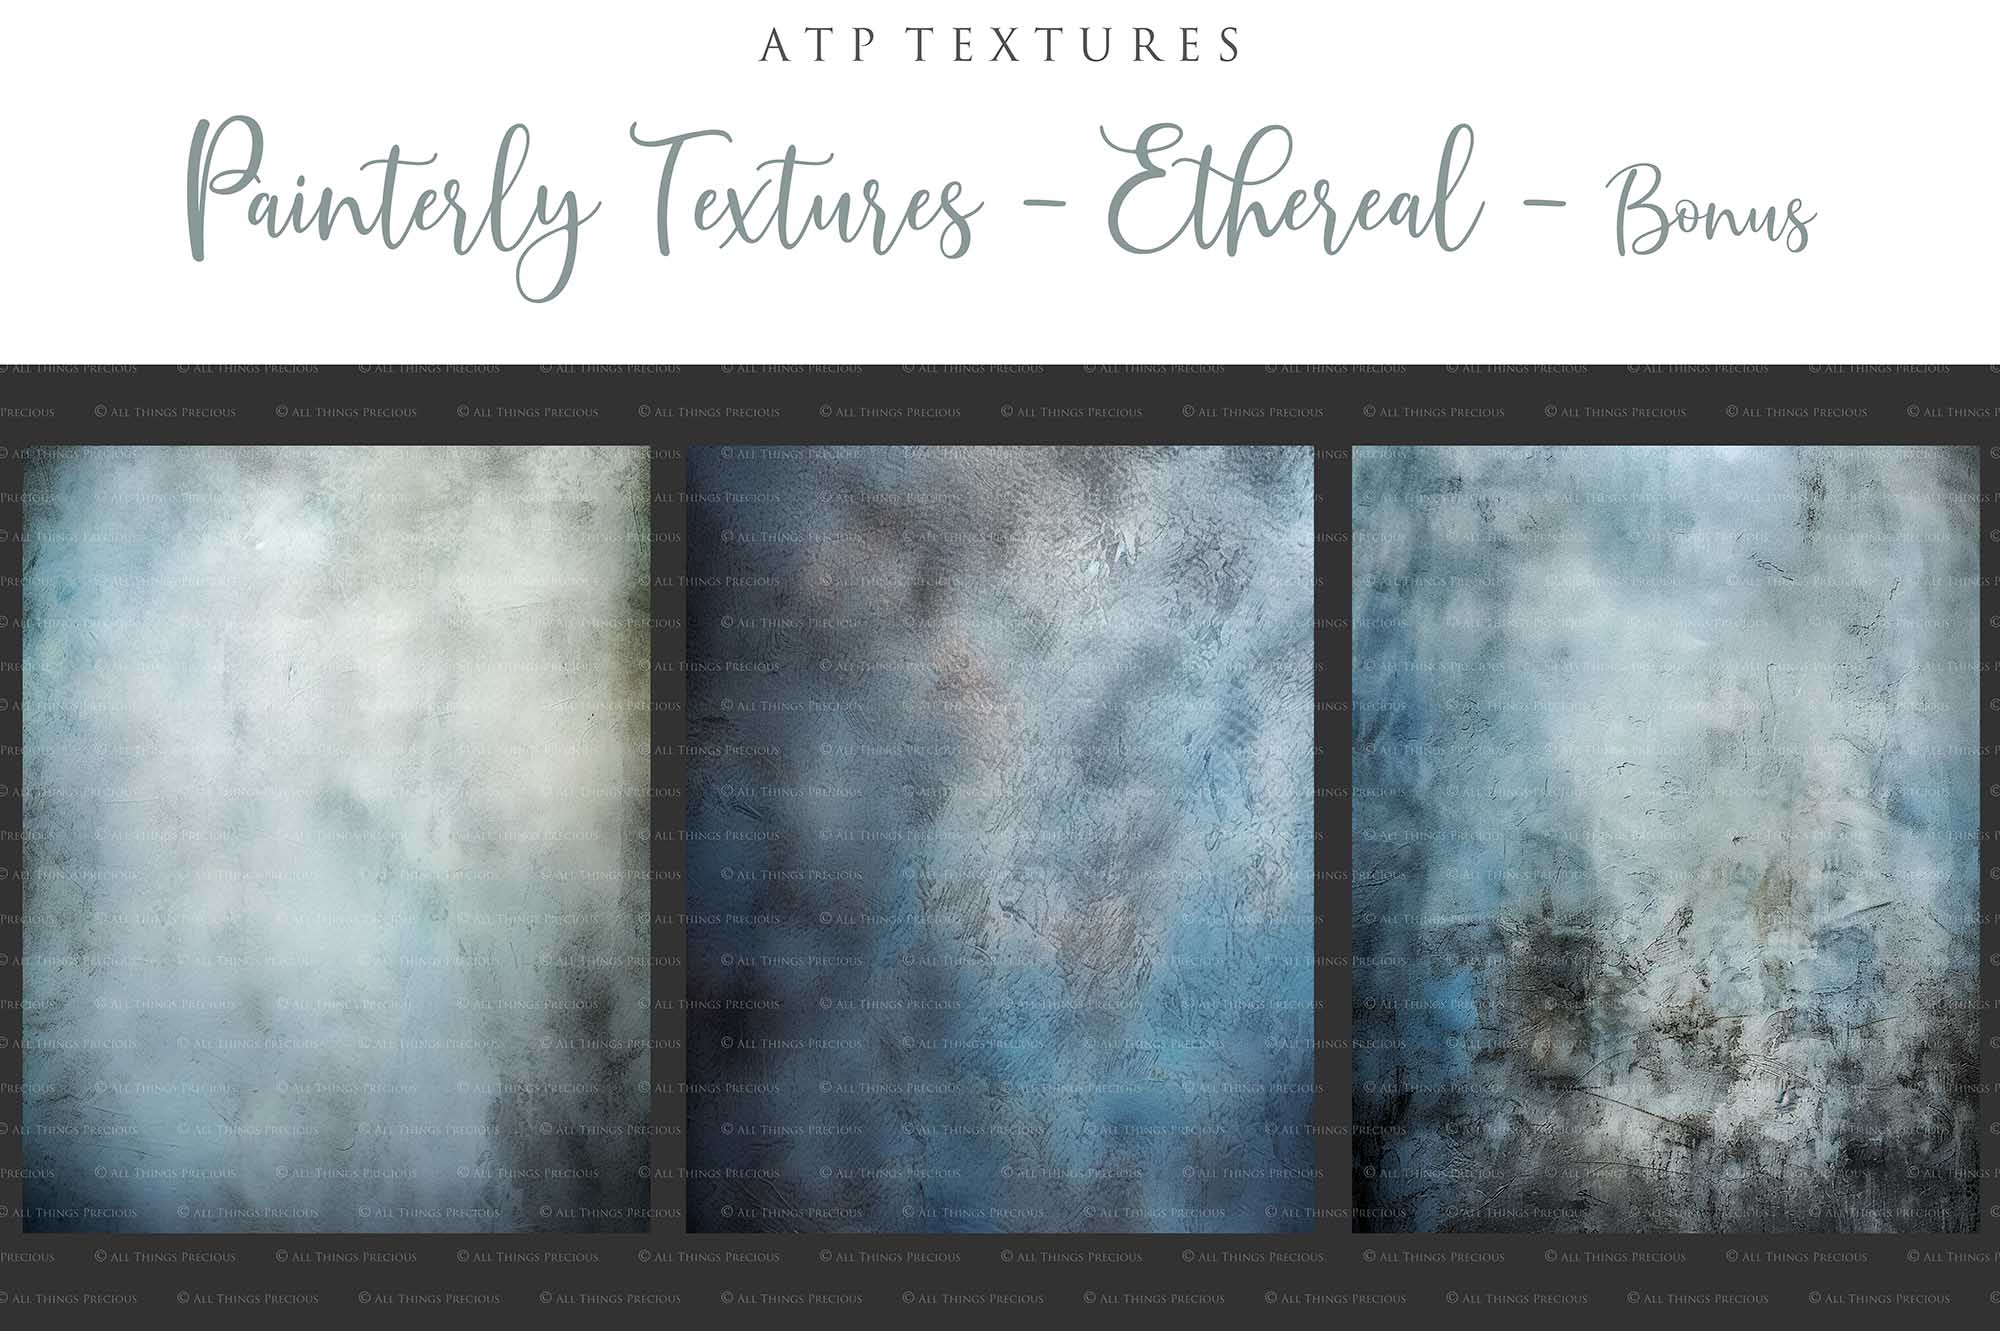 15 Painterly Textures / Digital Backgrounds - ETHEREAL - Set 2